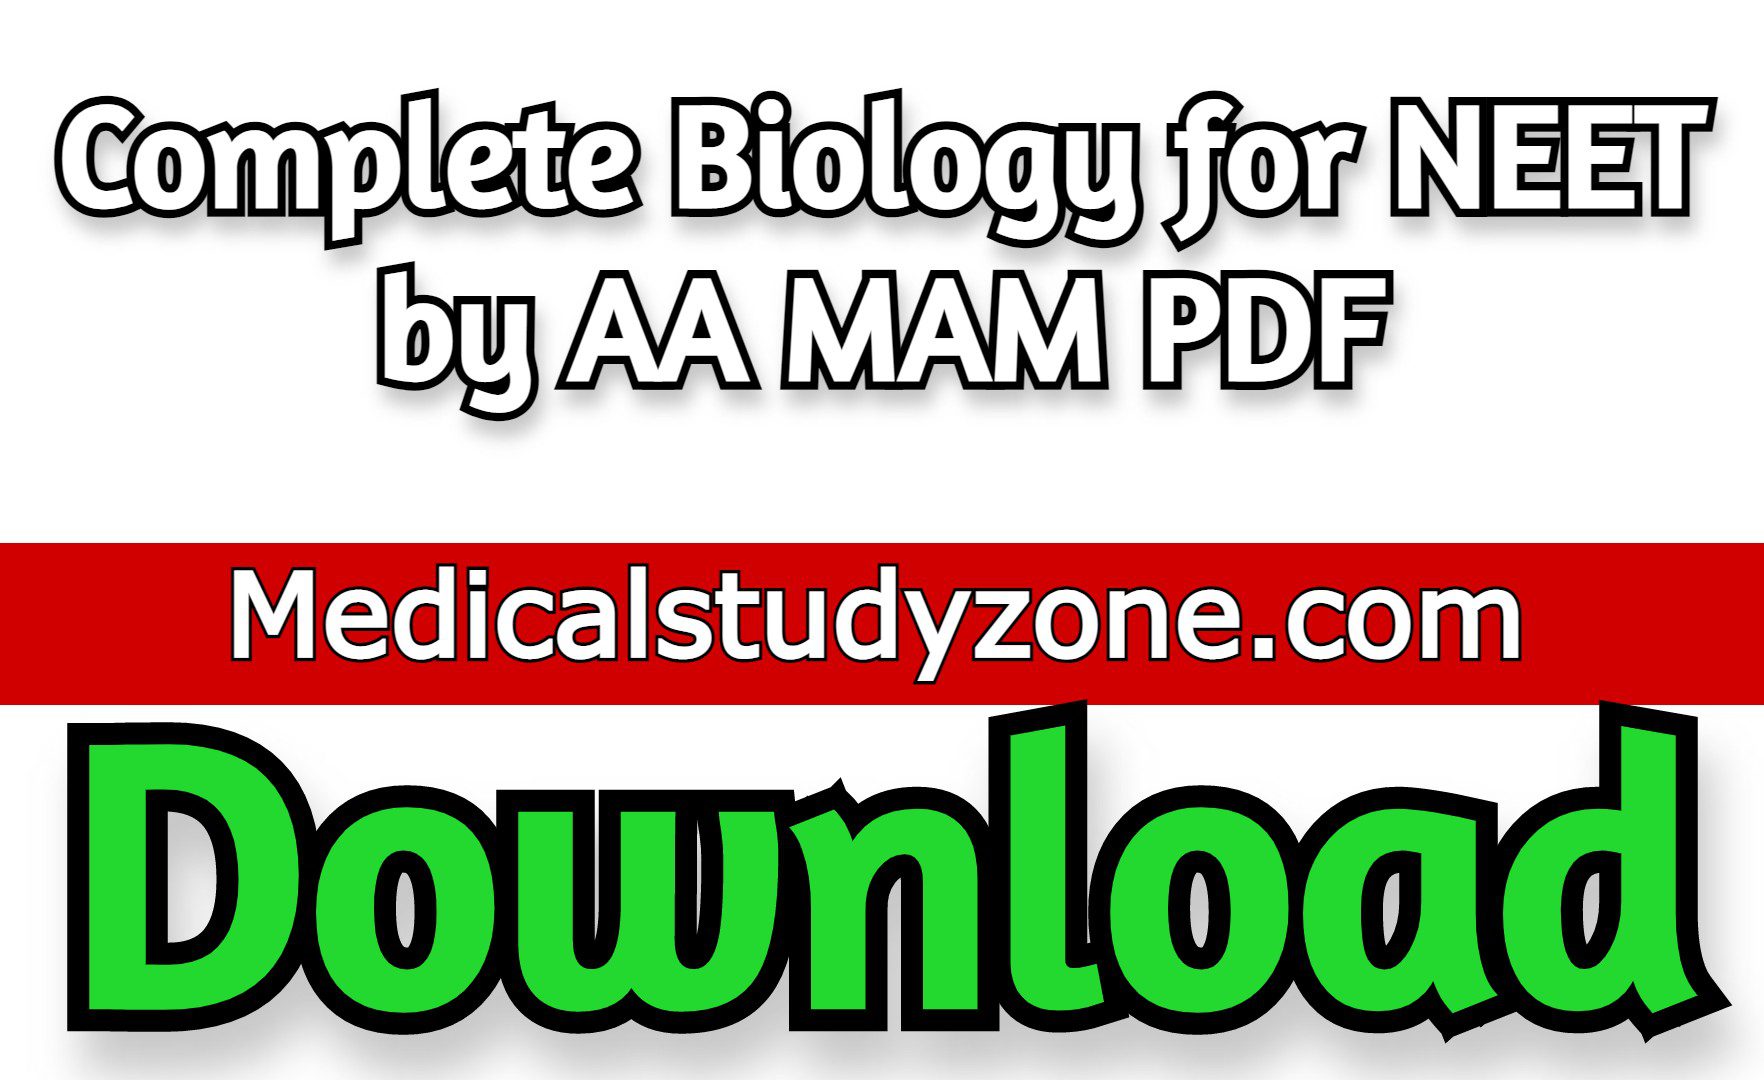 Complete Biology for NEET by AA MAM PDF Free Download